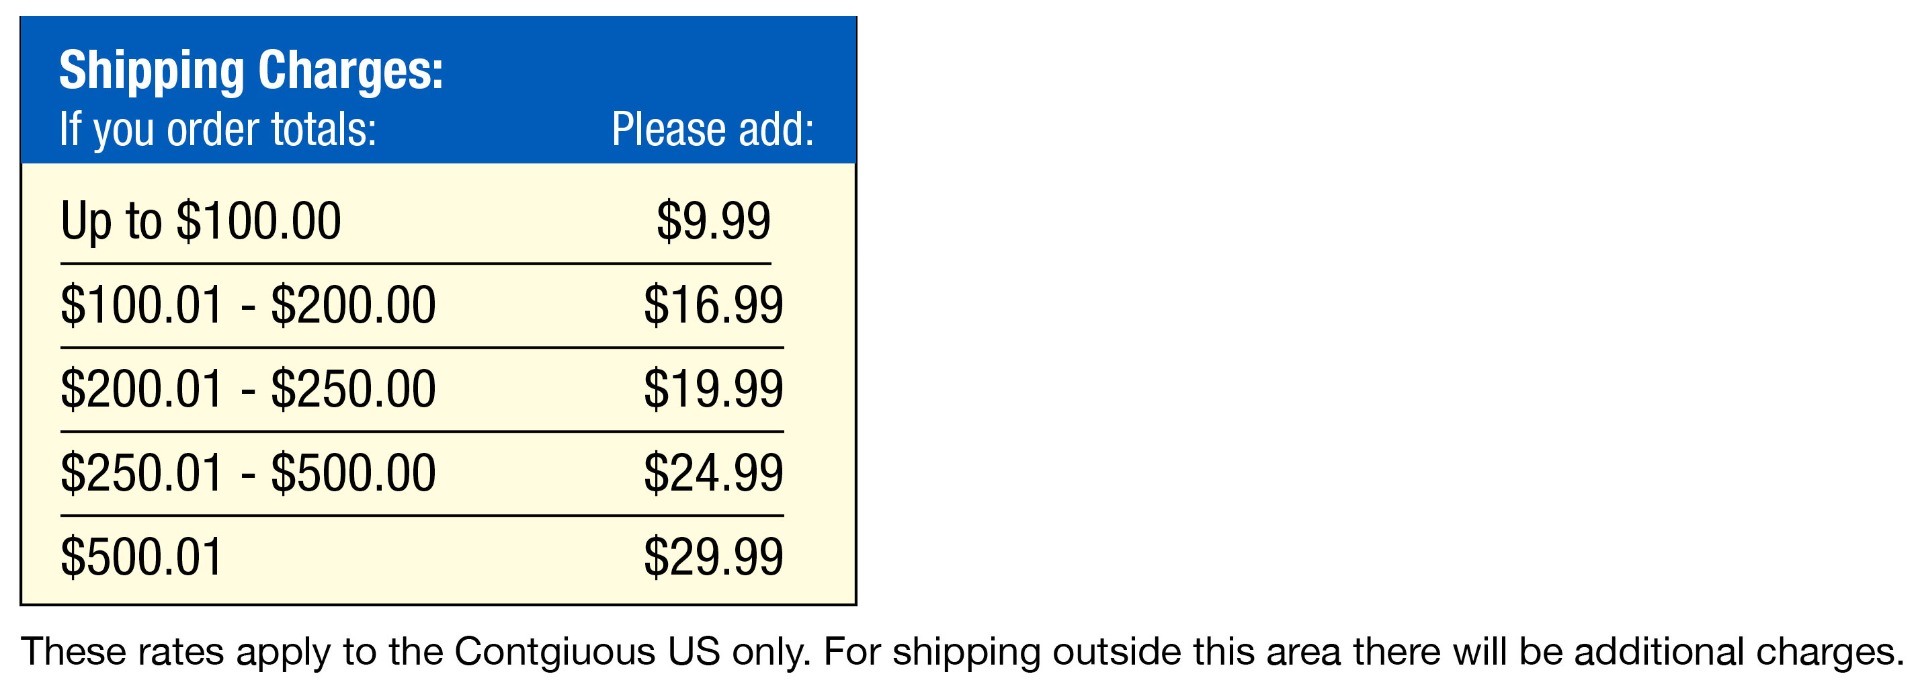 Shipping Charges